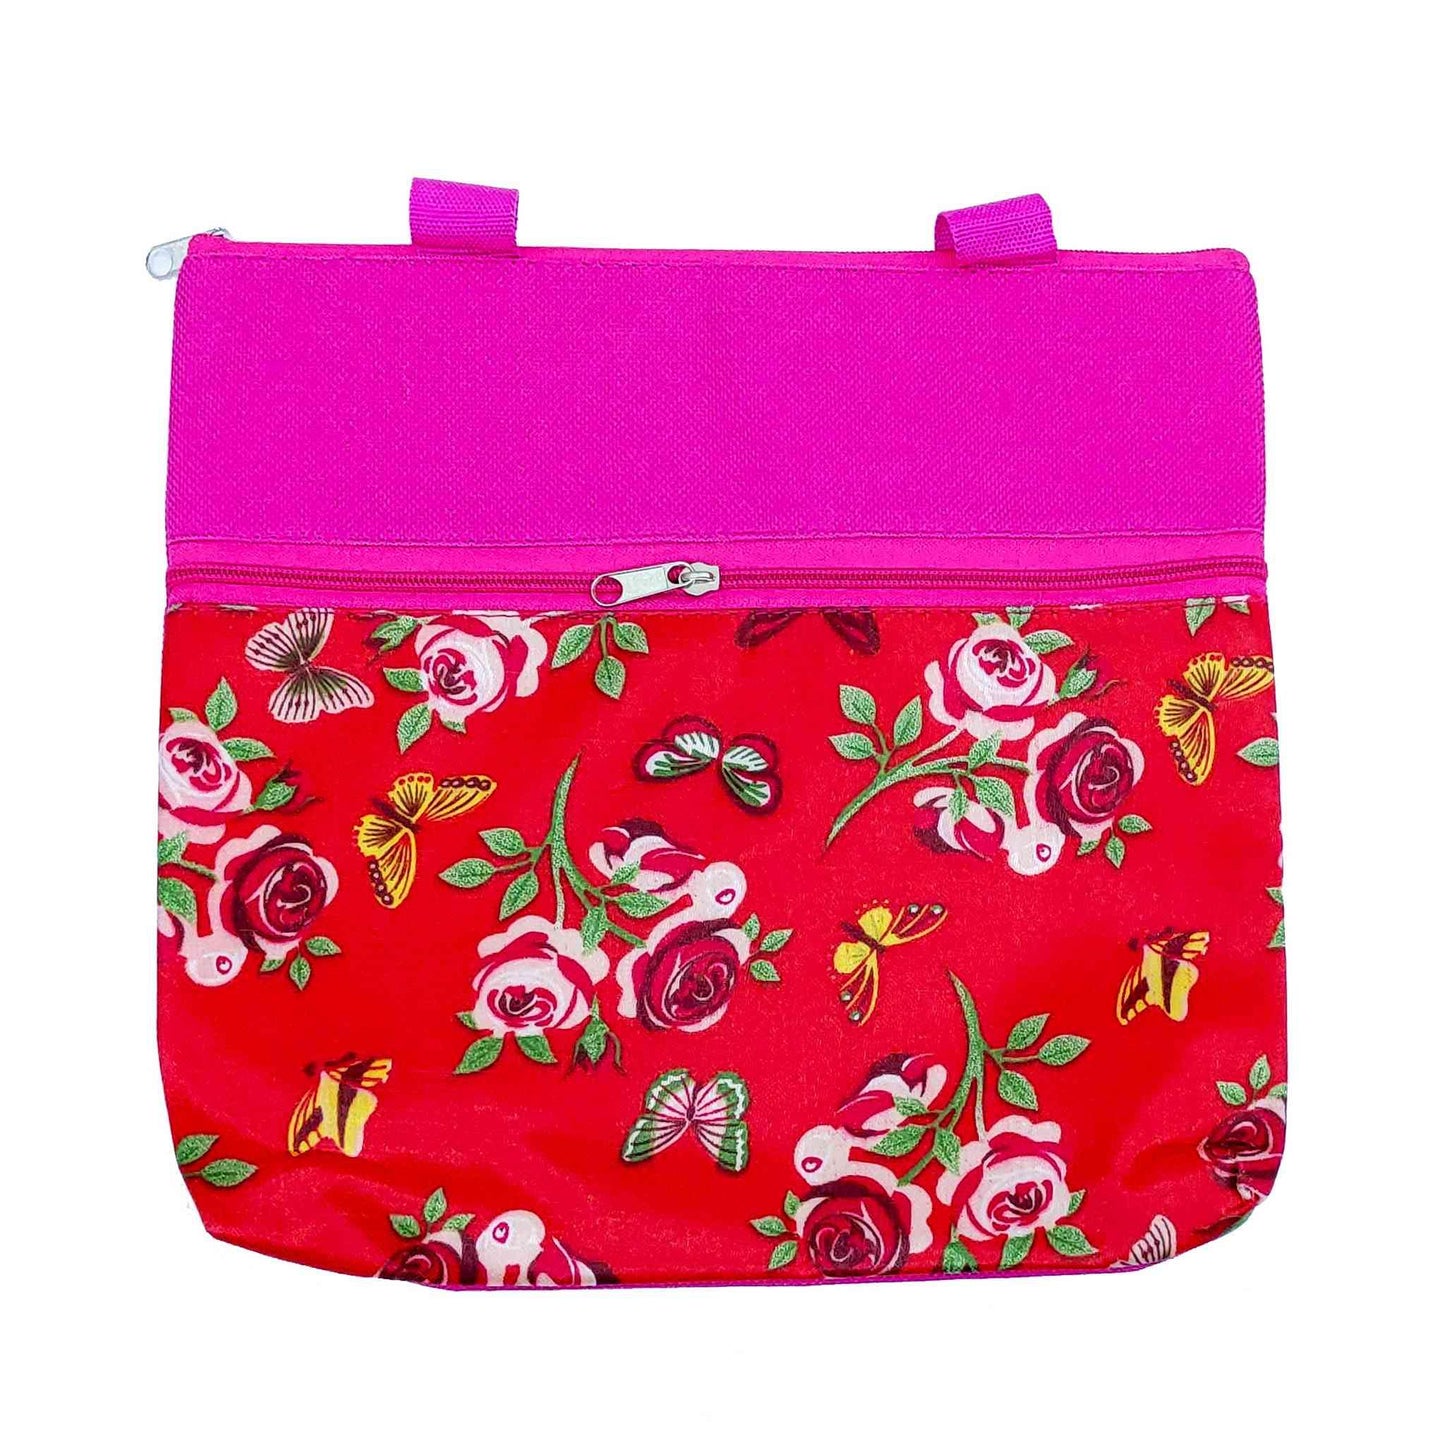 Imported Durable Canvas Printed multi purpose utility Medium size Bag with handles for all occasions for the girls and ladies, Design 3, Pink - Indian Petals